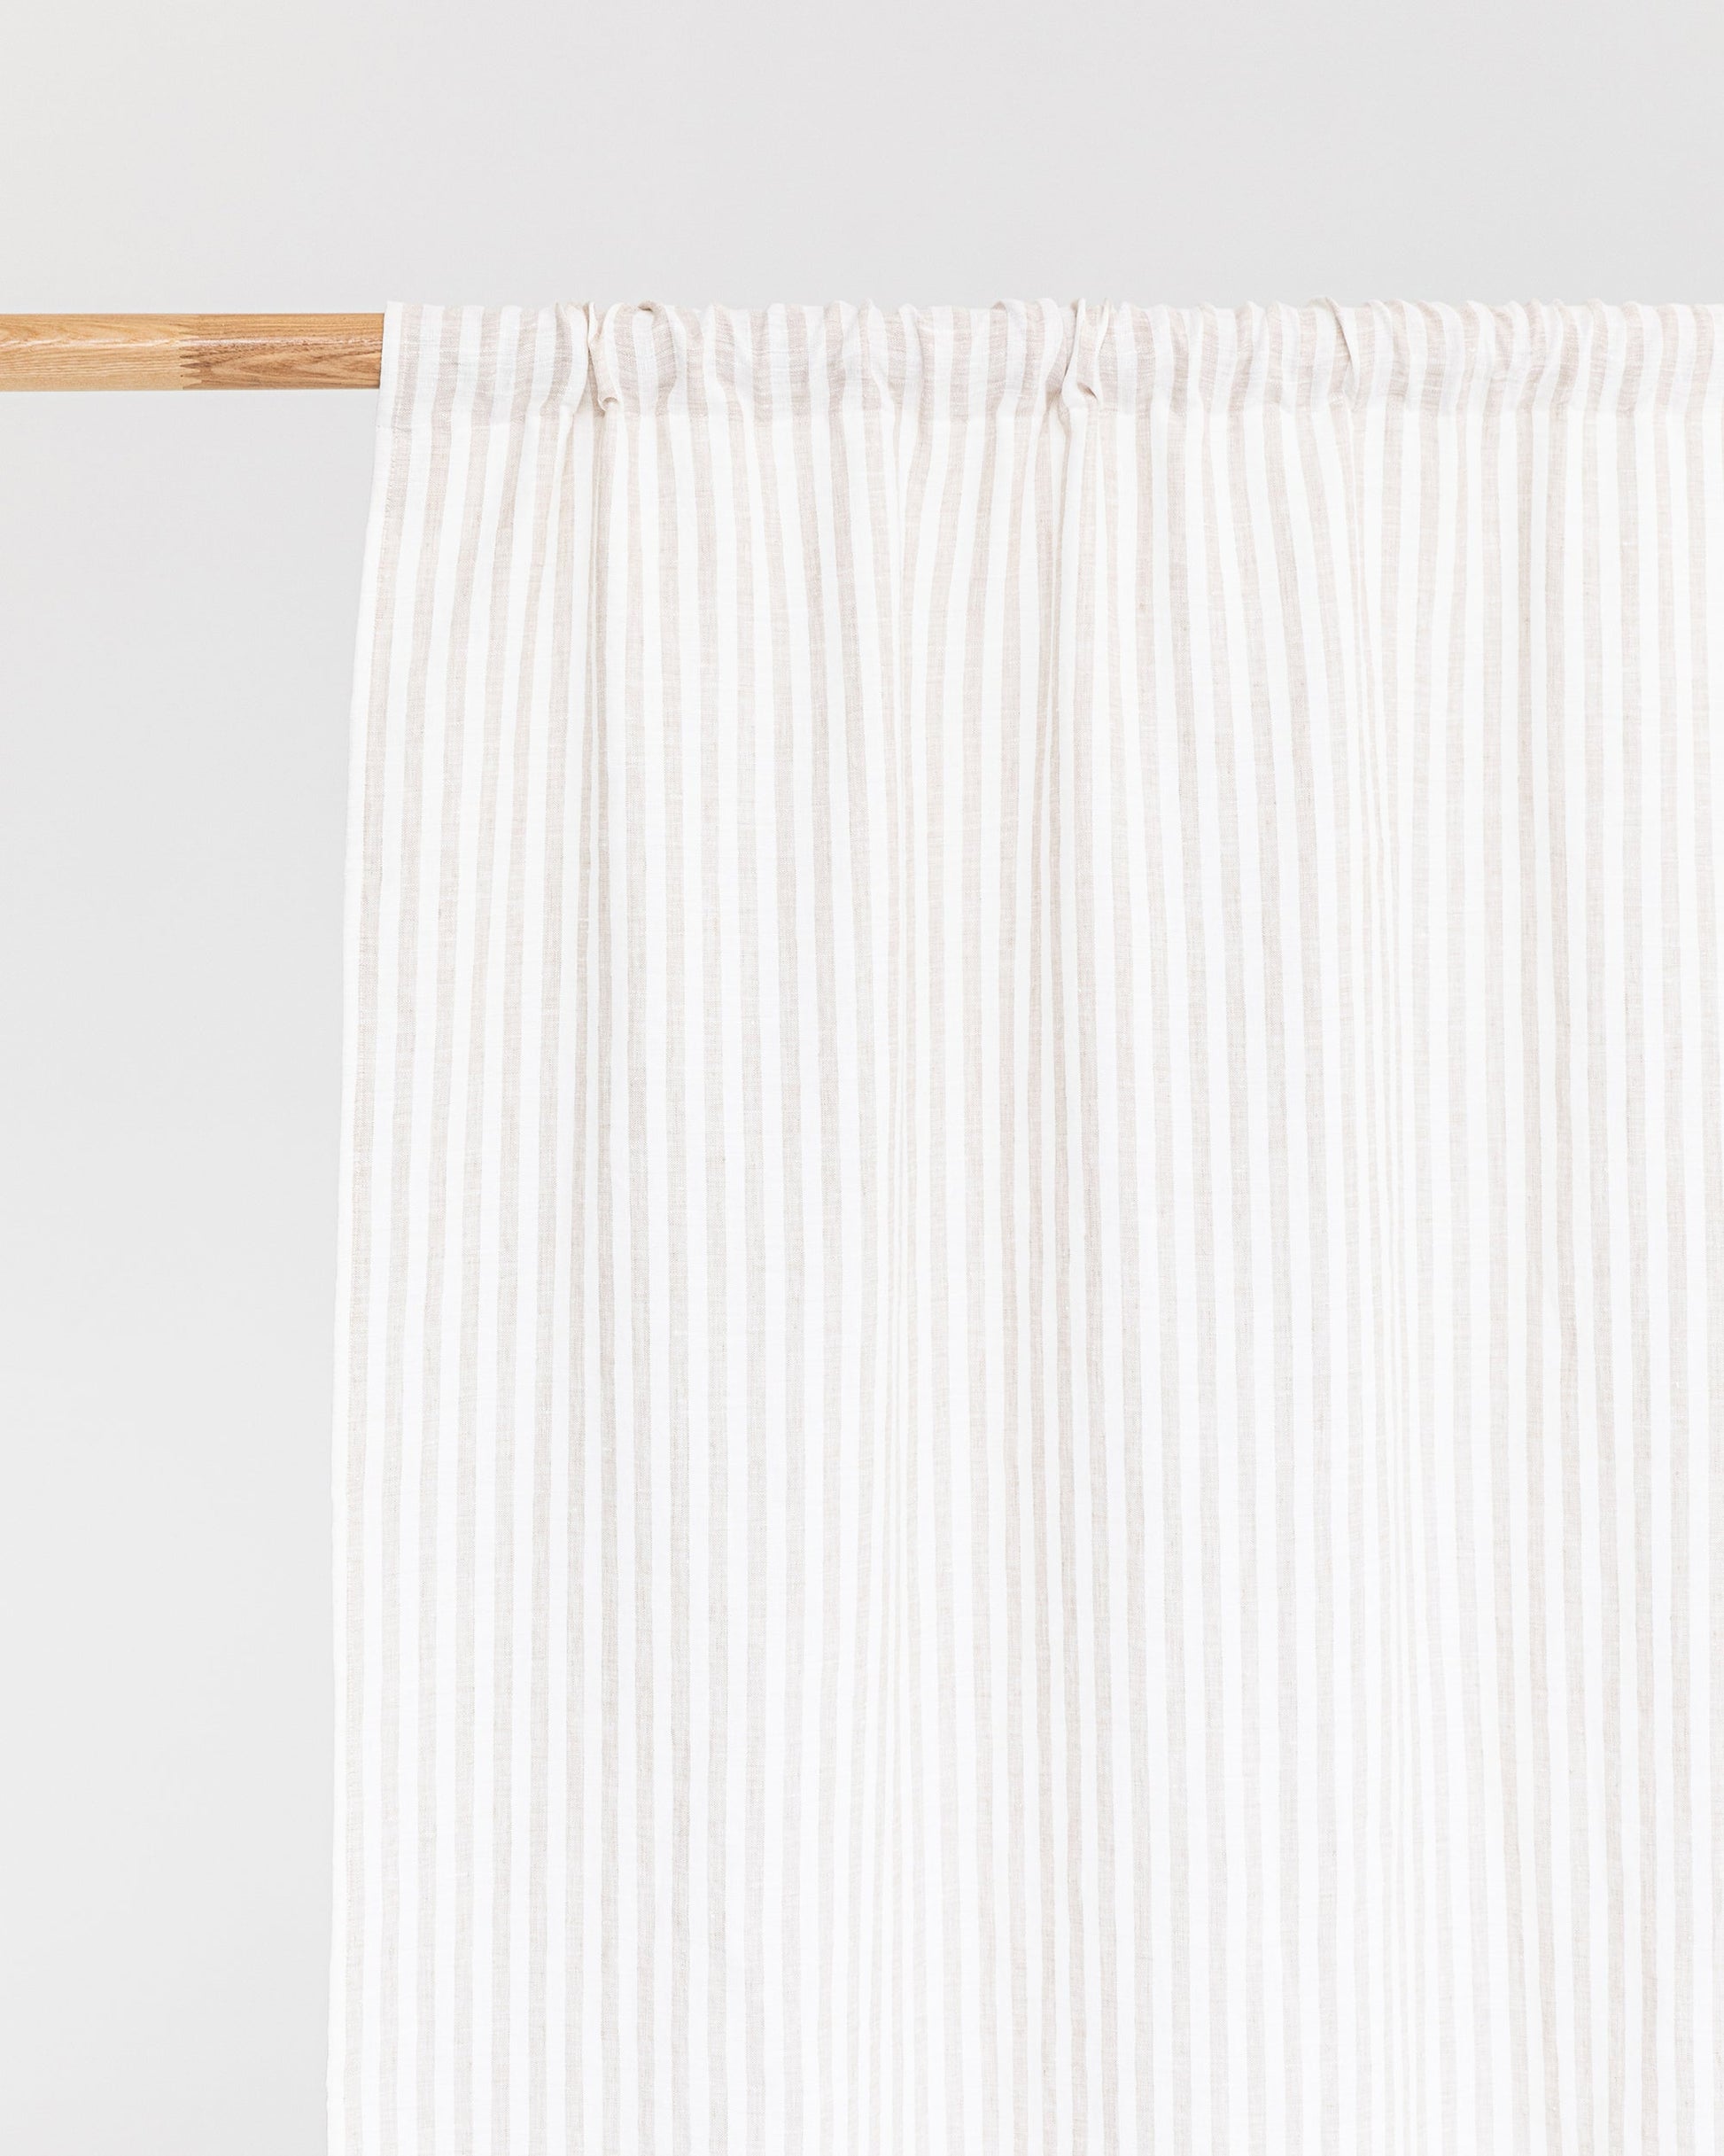 Custom size rod pocket linen curtain panel (1 pcs) in Striped in natural - MagicLinen